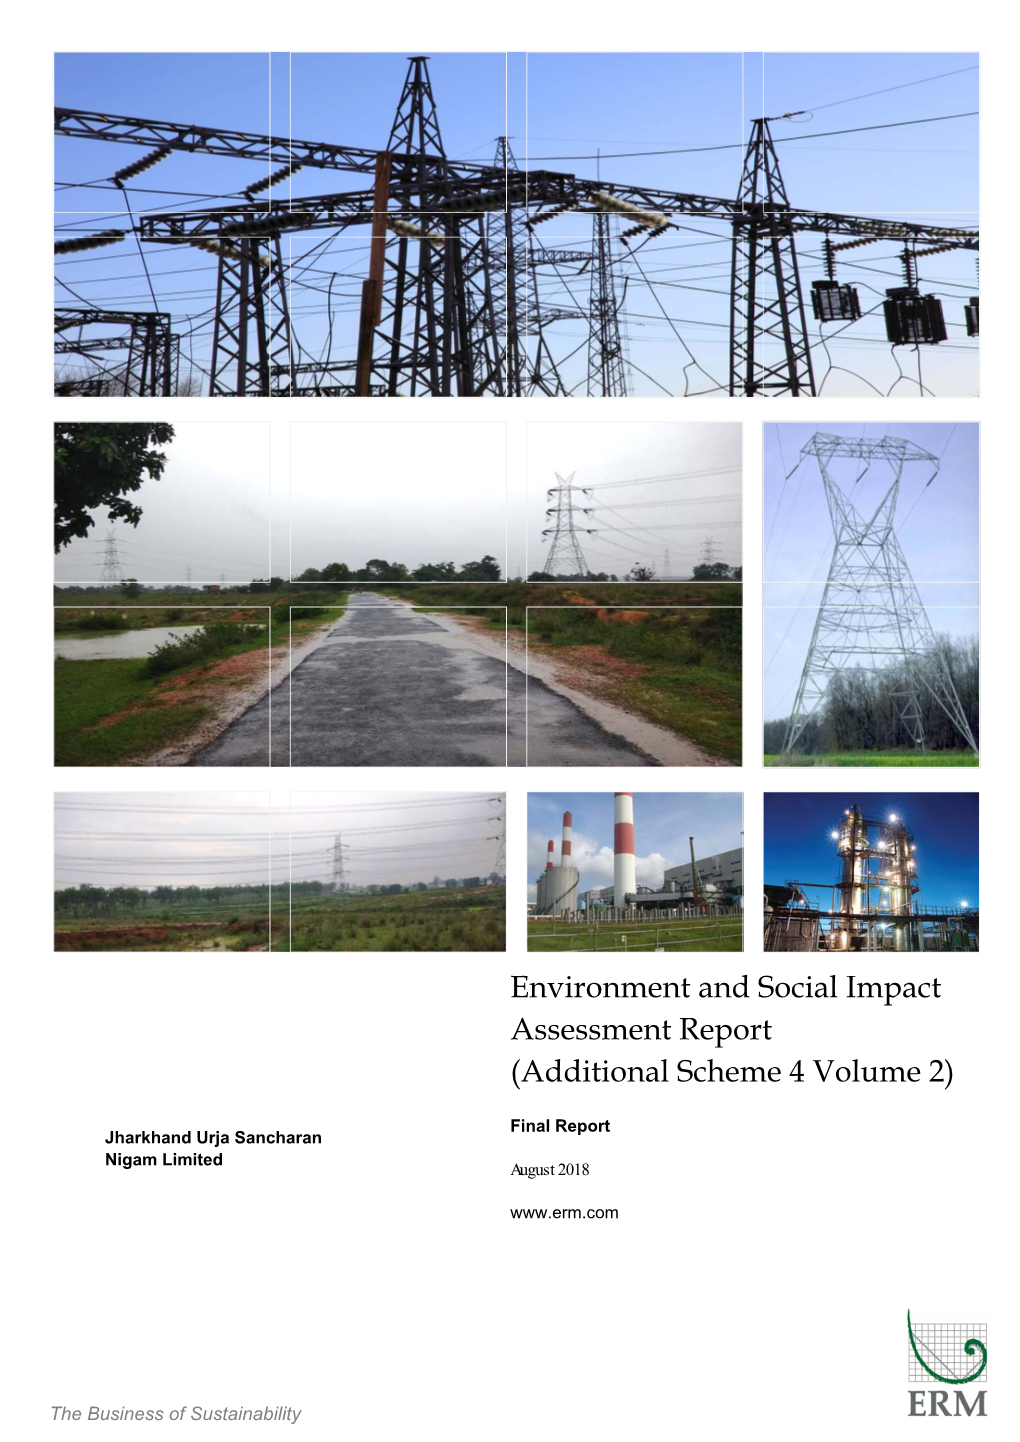 Environment and Social Impact Assessment Report (Additional Scheme 4 Volume 2)